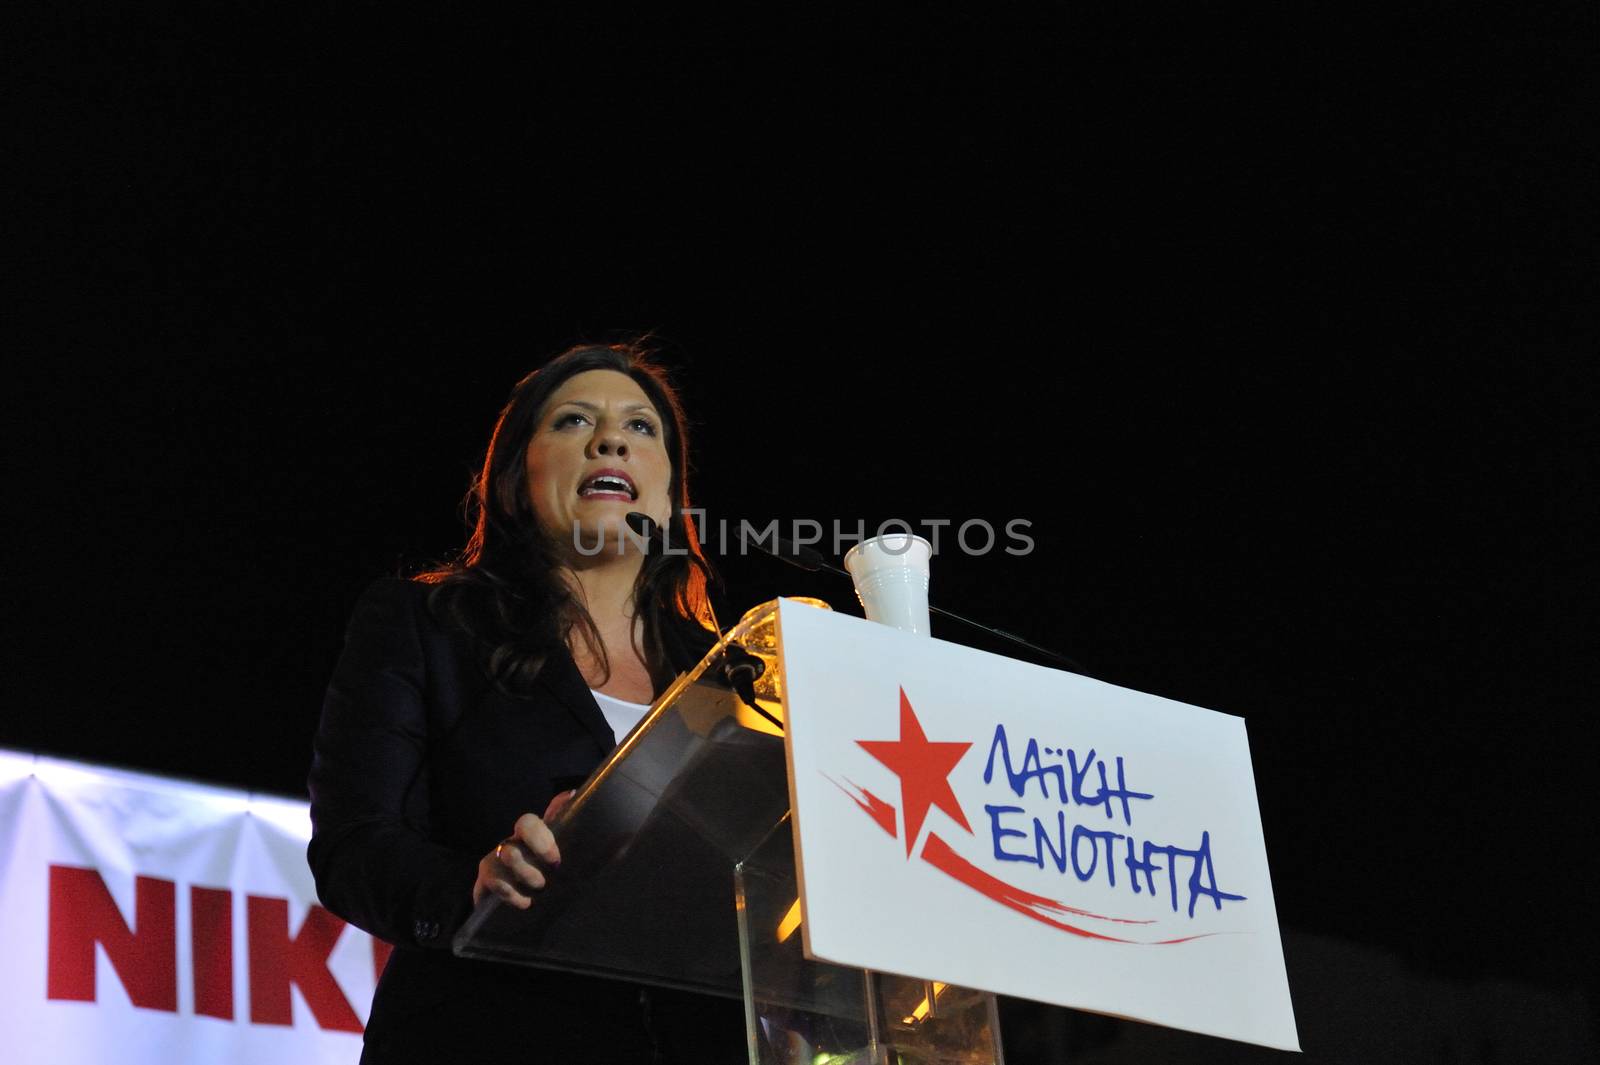 GREECE, Athens: Greek parliament president Zoe Konstantopoulou addresses supporters of the Popular Unity party at its main pre-election rally in Athens on September 15, 2015. Greece's snap election takes place on September 20, with Syriza leader Alexis Tsipras and New Democracy's Evangelos Meimarakis the frontrunners.